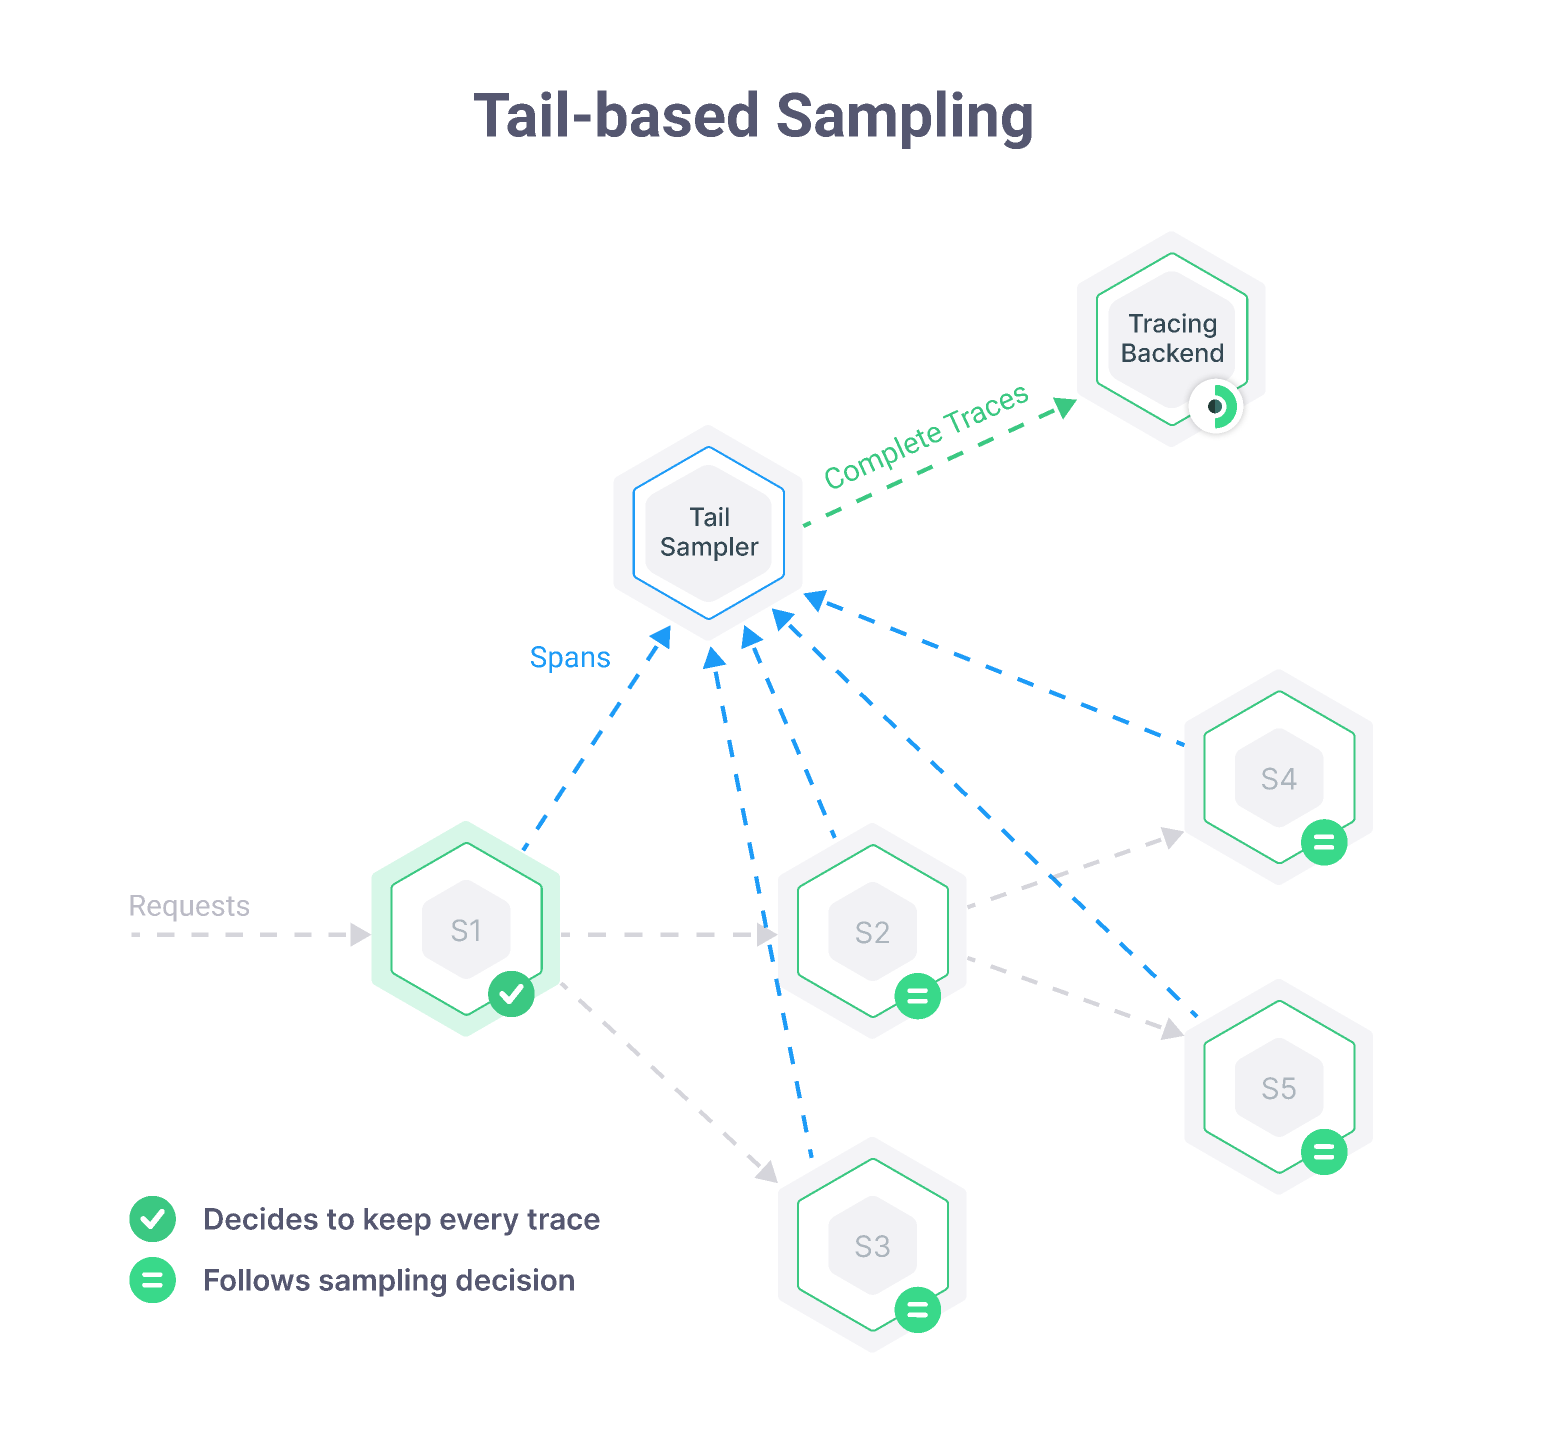 Tail-based sampling in distributed systems